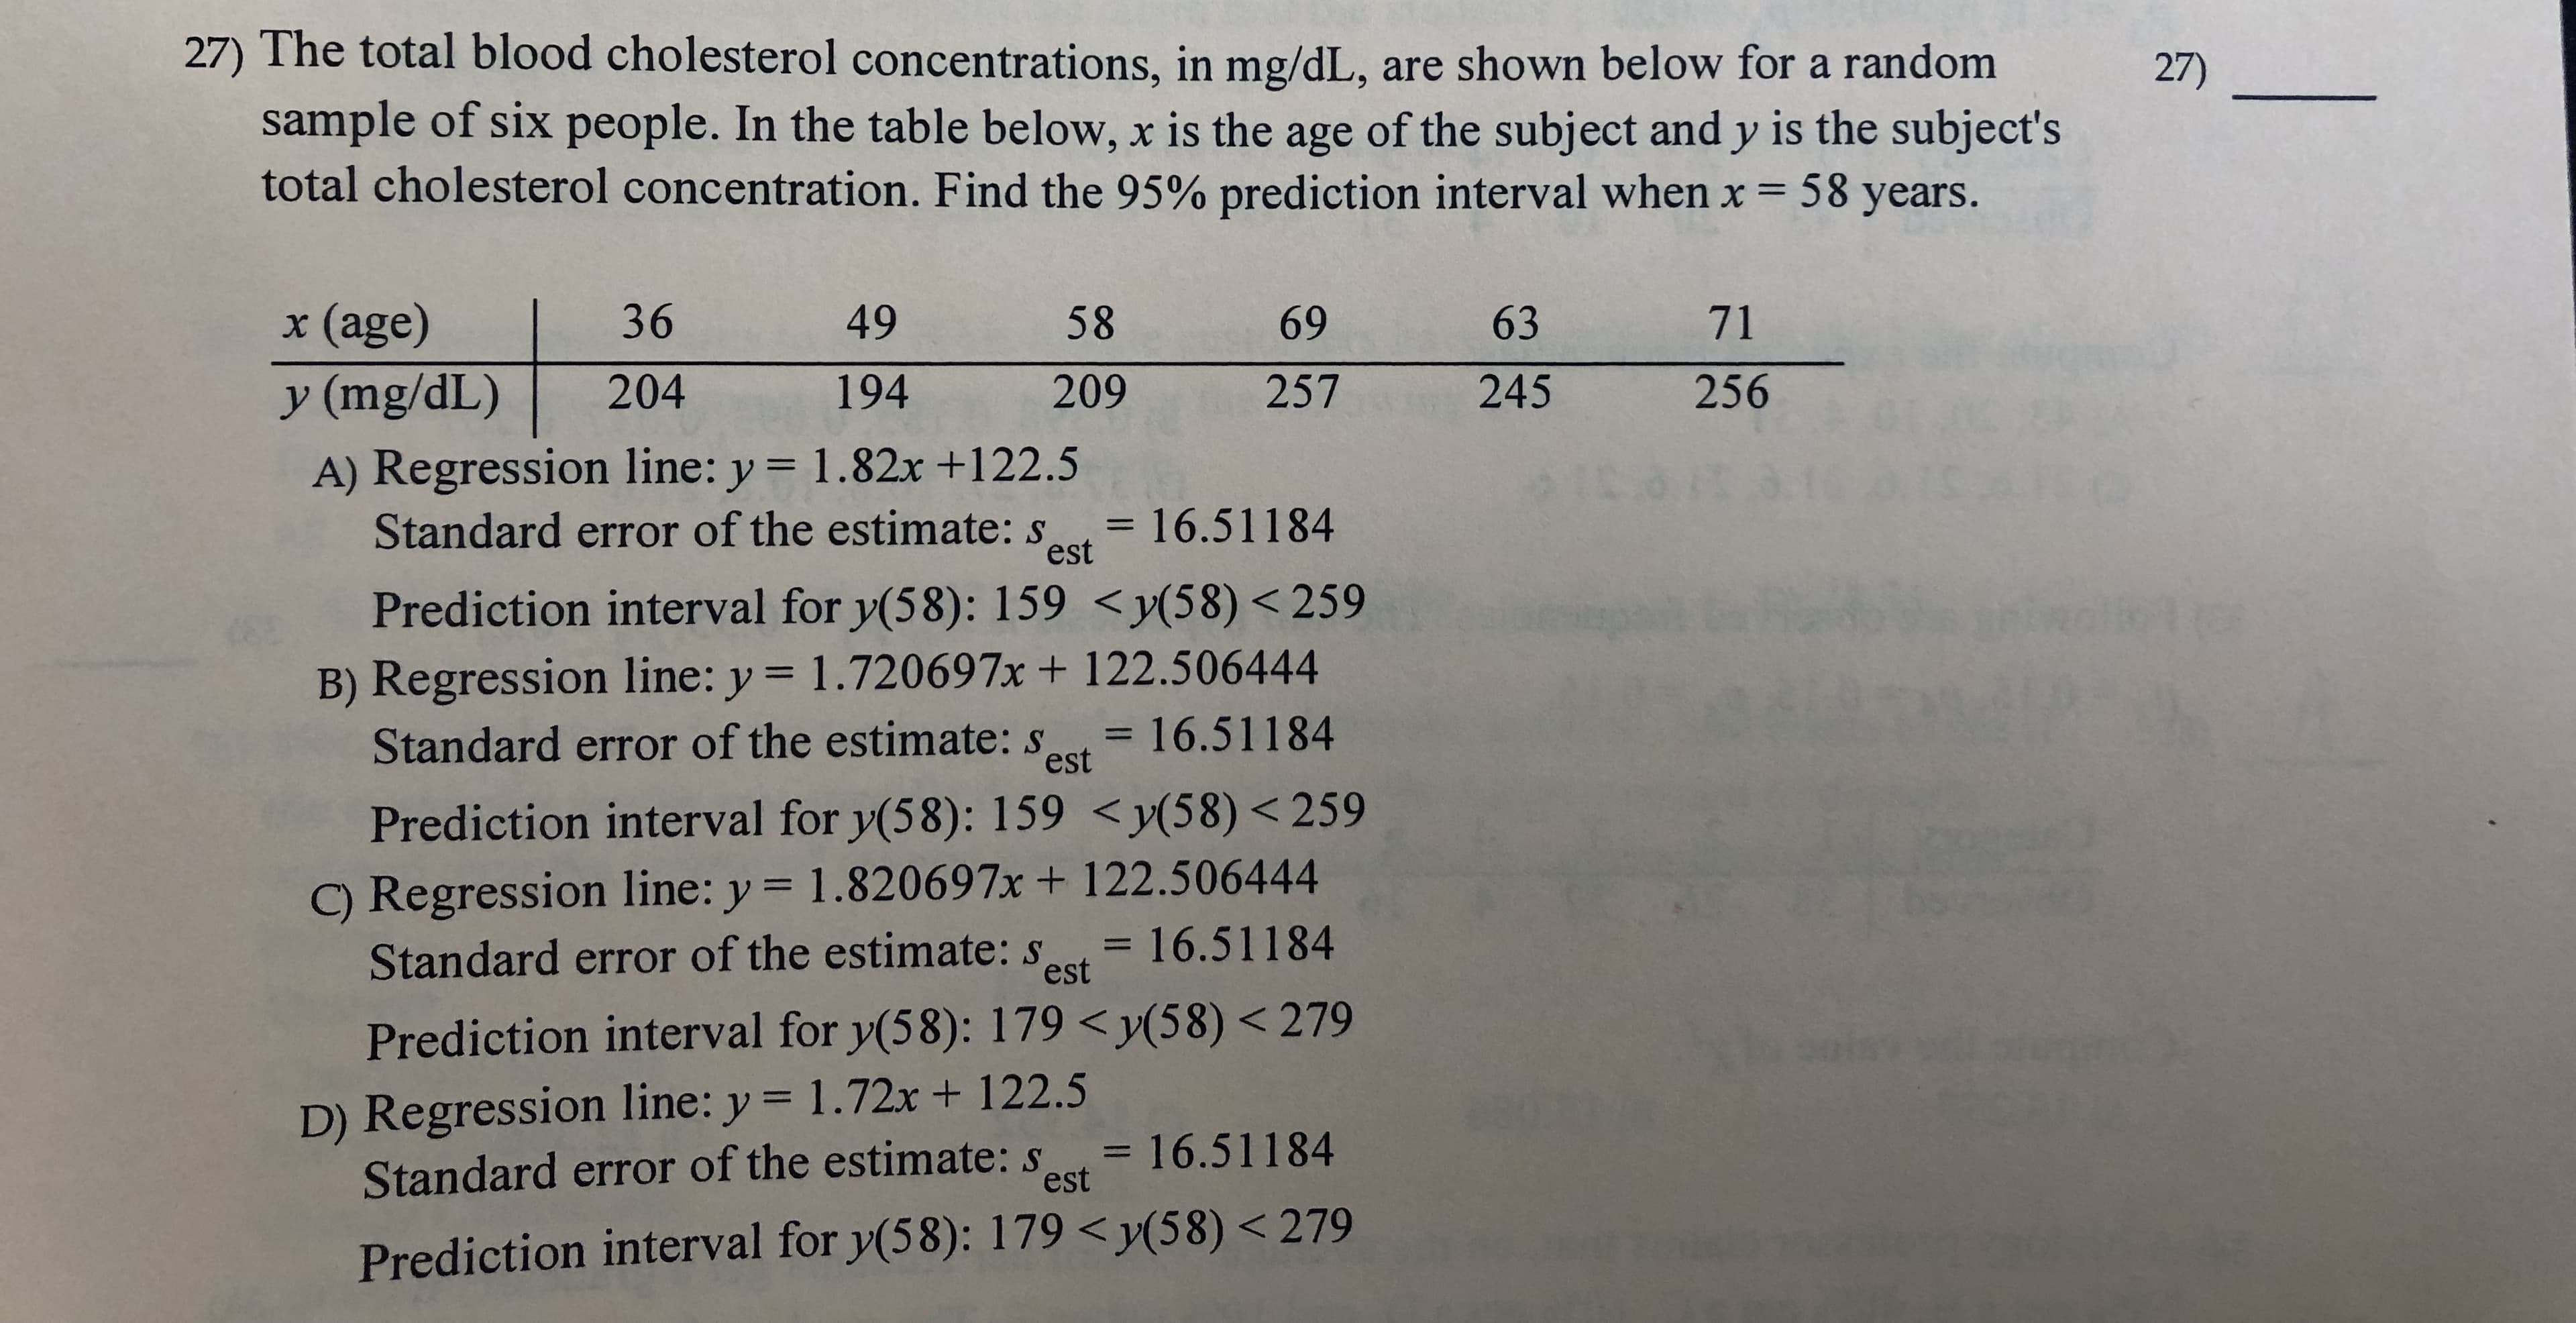 27) The total blood cholesterol concentrations, in mg/dL, are shown below for a random
sample of six people. In the table below, x is the age of the subject and y is the subject's
total cholesterol concentration. Find the 95% prediction interval when x = 58 years.
27)
x (age)
36
49
58
69
63
71
204
256
194
257
245
y (mg/dL)
209
A) Regression line: y = 1.82x +122.5
Standard error of the estimate: s
est
= 16.51184
Prediction interval for y(58): 159 <y(58)< 259
B) Regression line: y = 1.720697x+ 122.506444
Standard error of the estimate: s
= 16.51184
est
Prediction interval for y(58): 159 <y(58) < 259
C) Regression line: y = 1.820697x + 122.506444
Standard error of the estimate: s
= 16.51184
est
Prediction interval for y(58): 179 <y(58) < 279
D) Regression line: y 1.72x + 122.5
Standard error of the estimate: st 16.51184
est
Prediction interval for y(58): 179 <y(58) < 279
